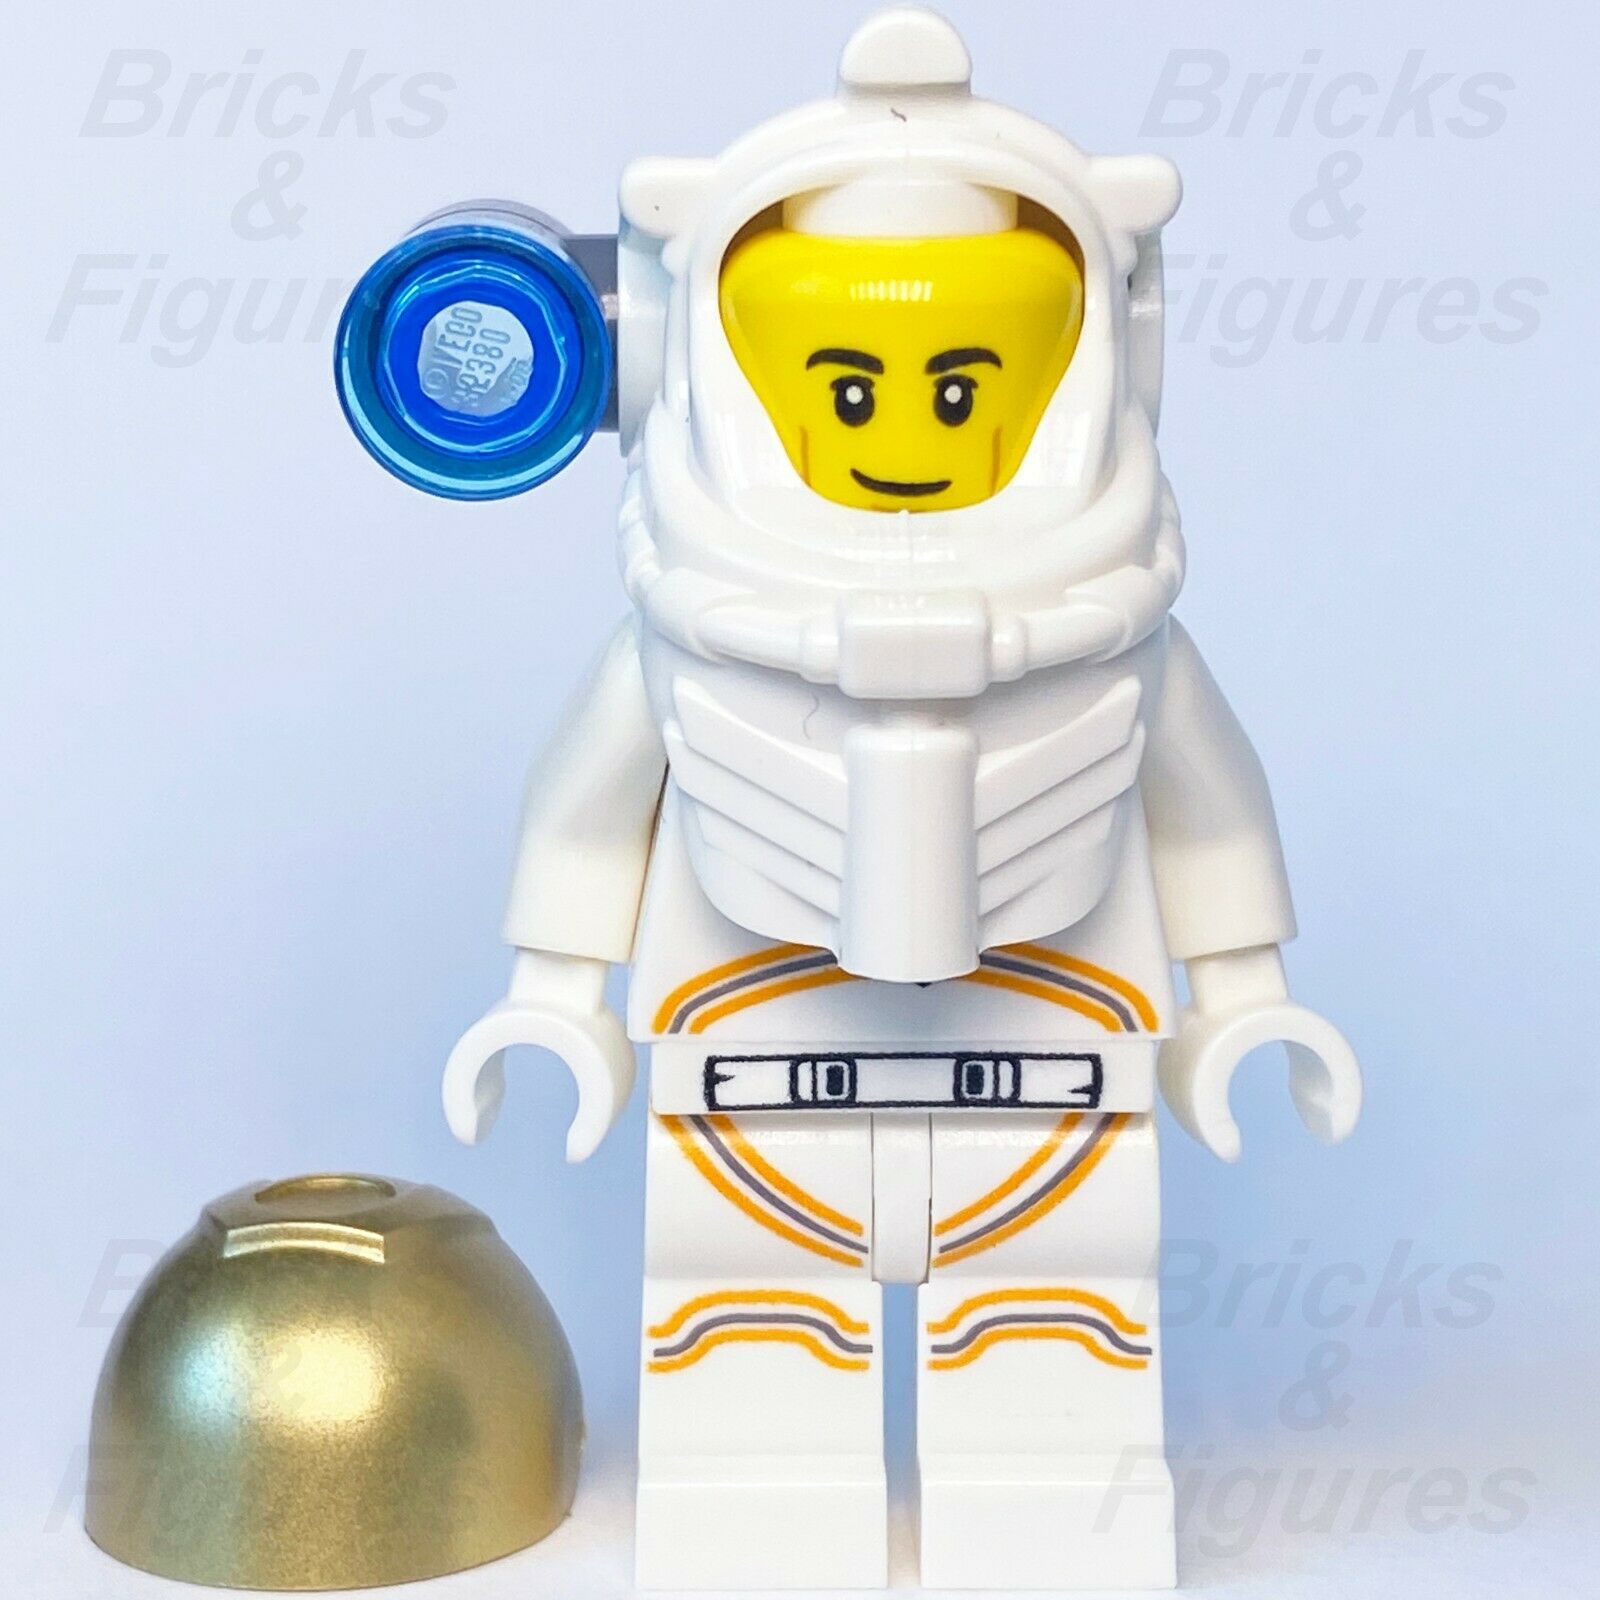 New Town City LEGO Astronaut Male with Side Lamp Space Port Minifigure 30365 - Bricks & Figures